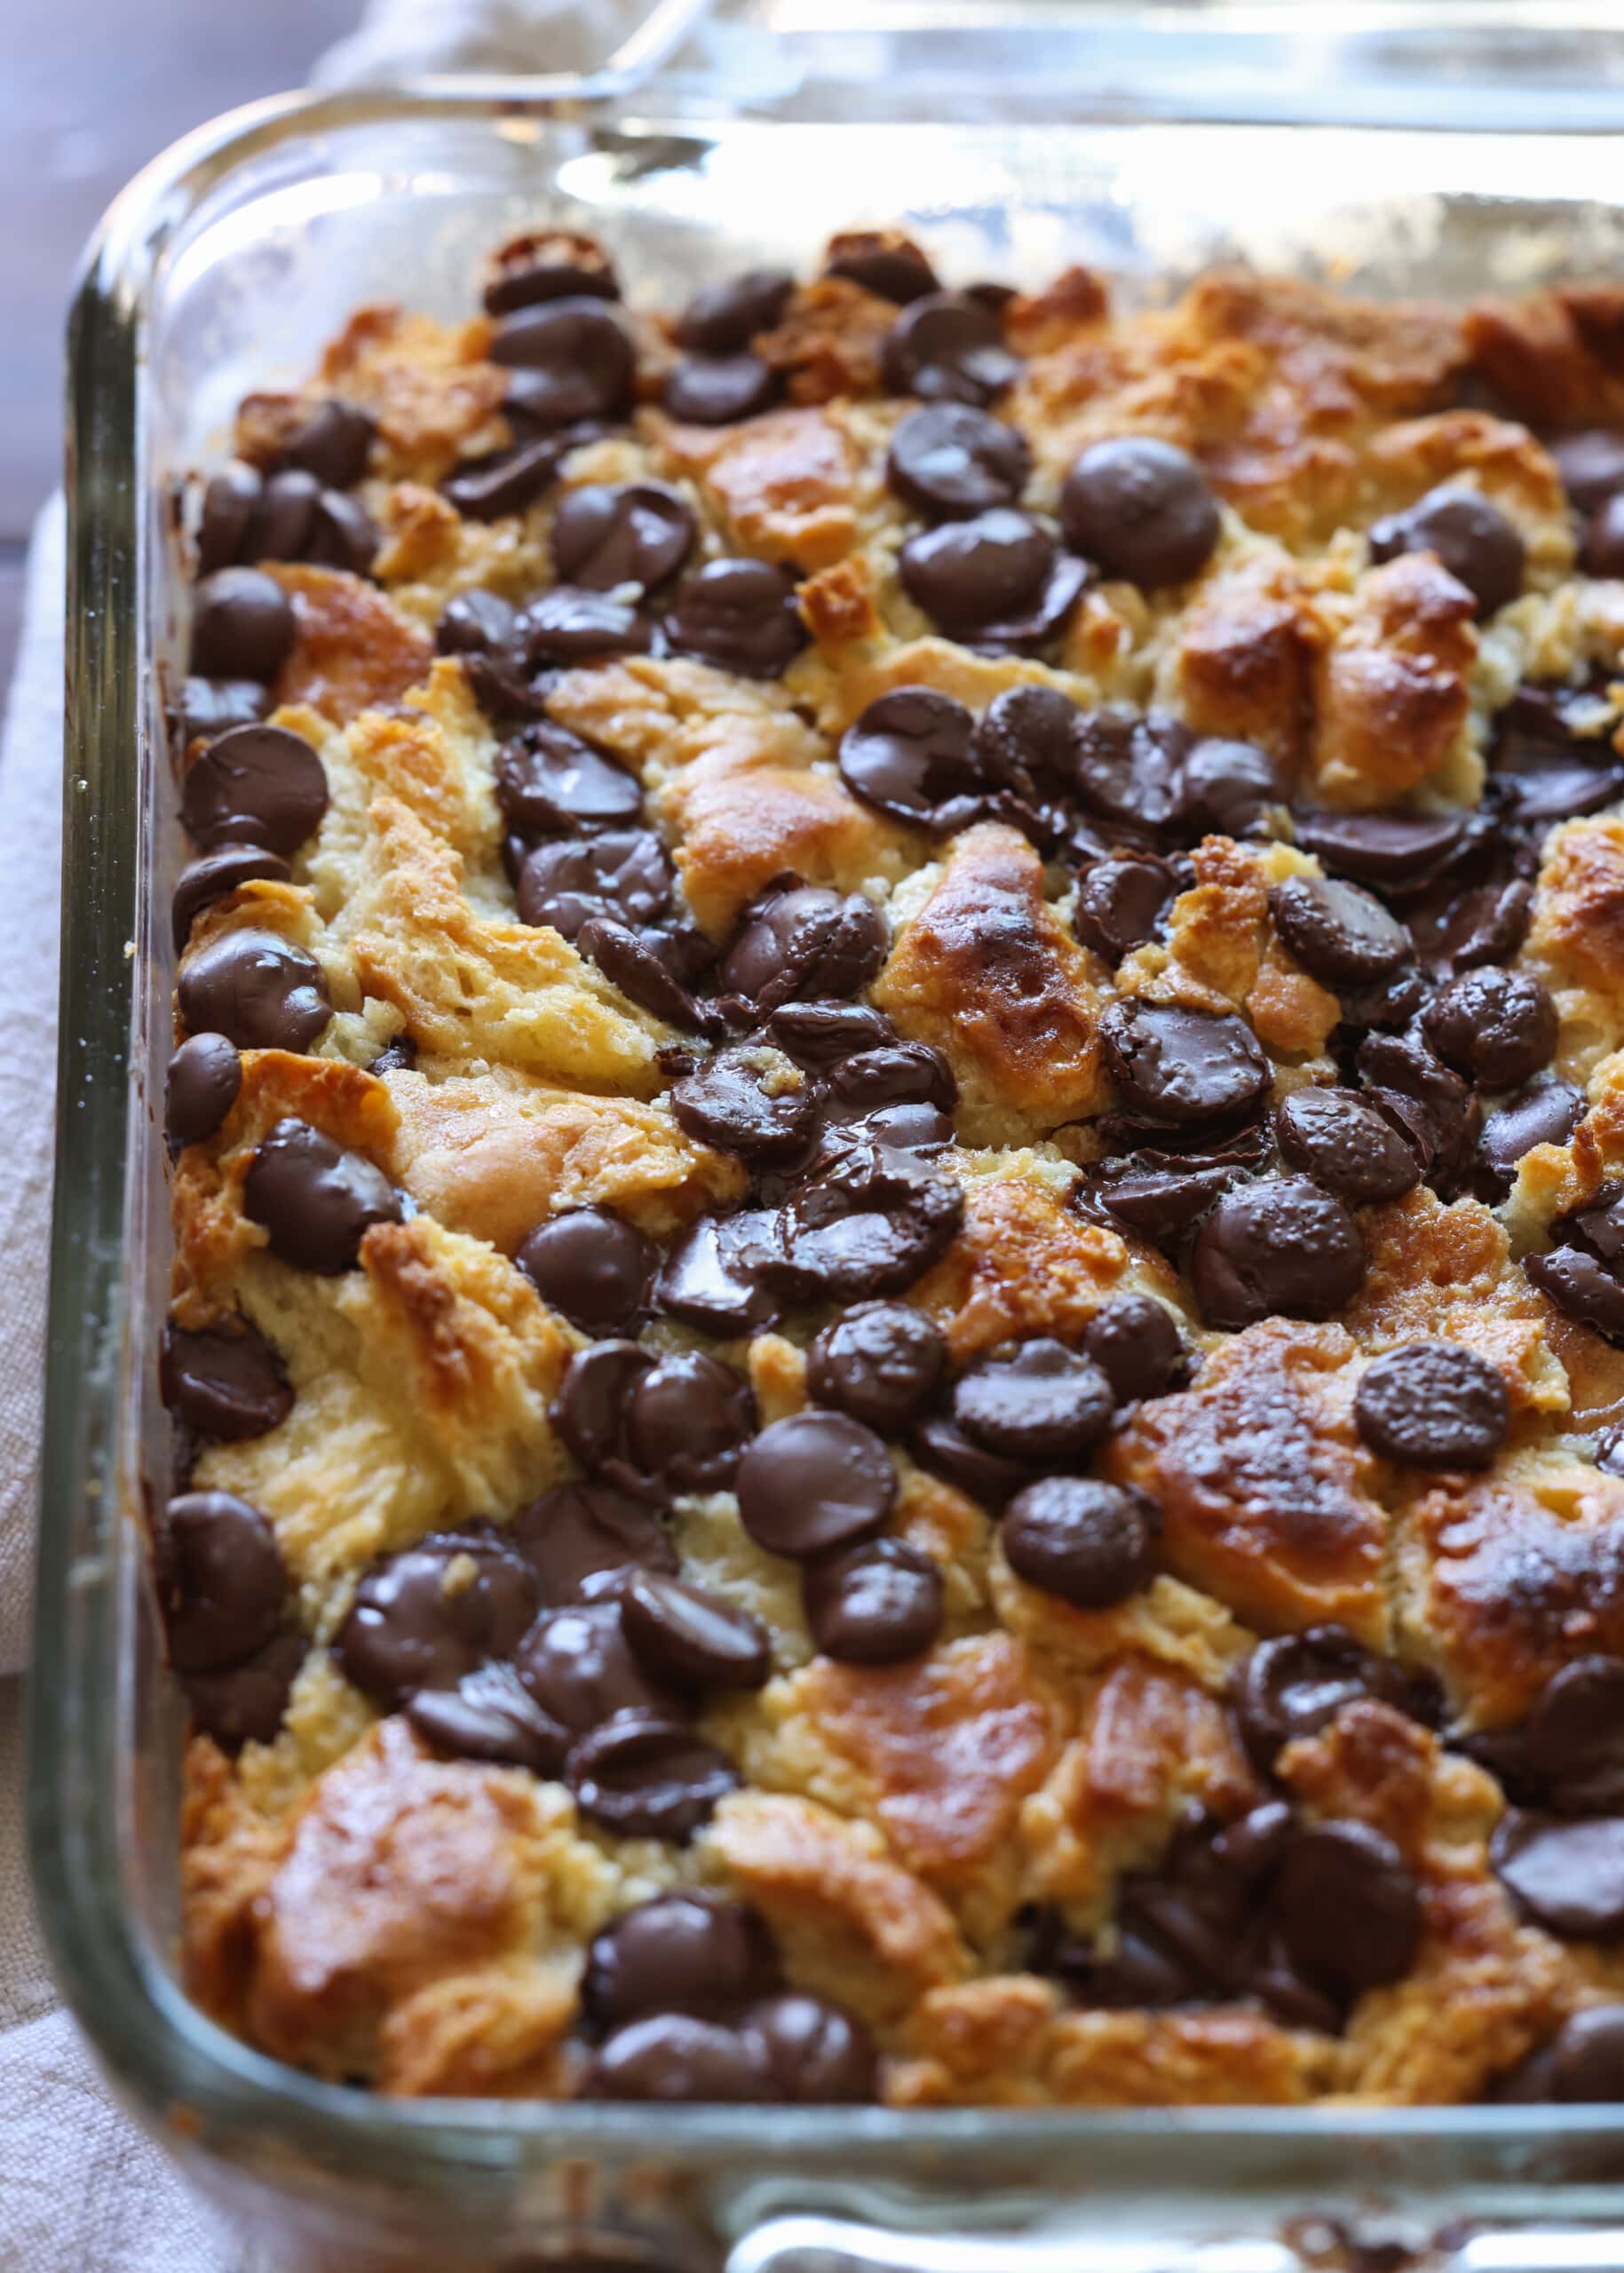 Bread pudding made with biscuits and topped with chocolate chips baked in an 8x8 pan.